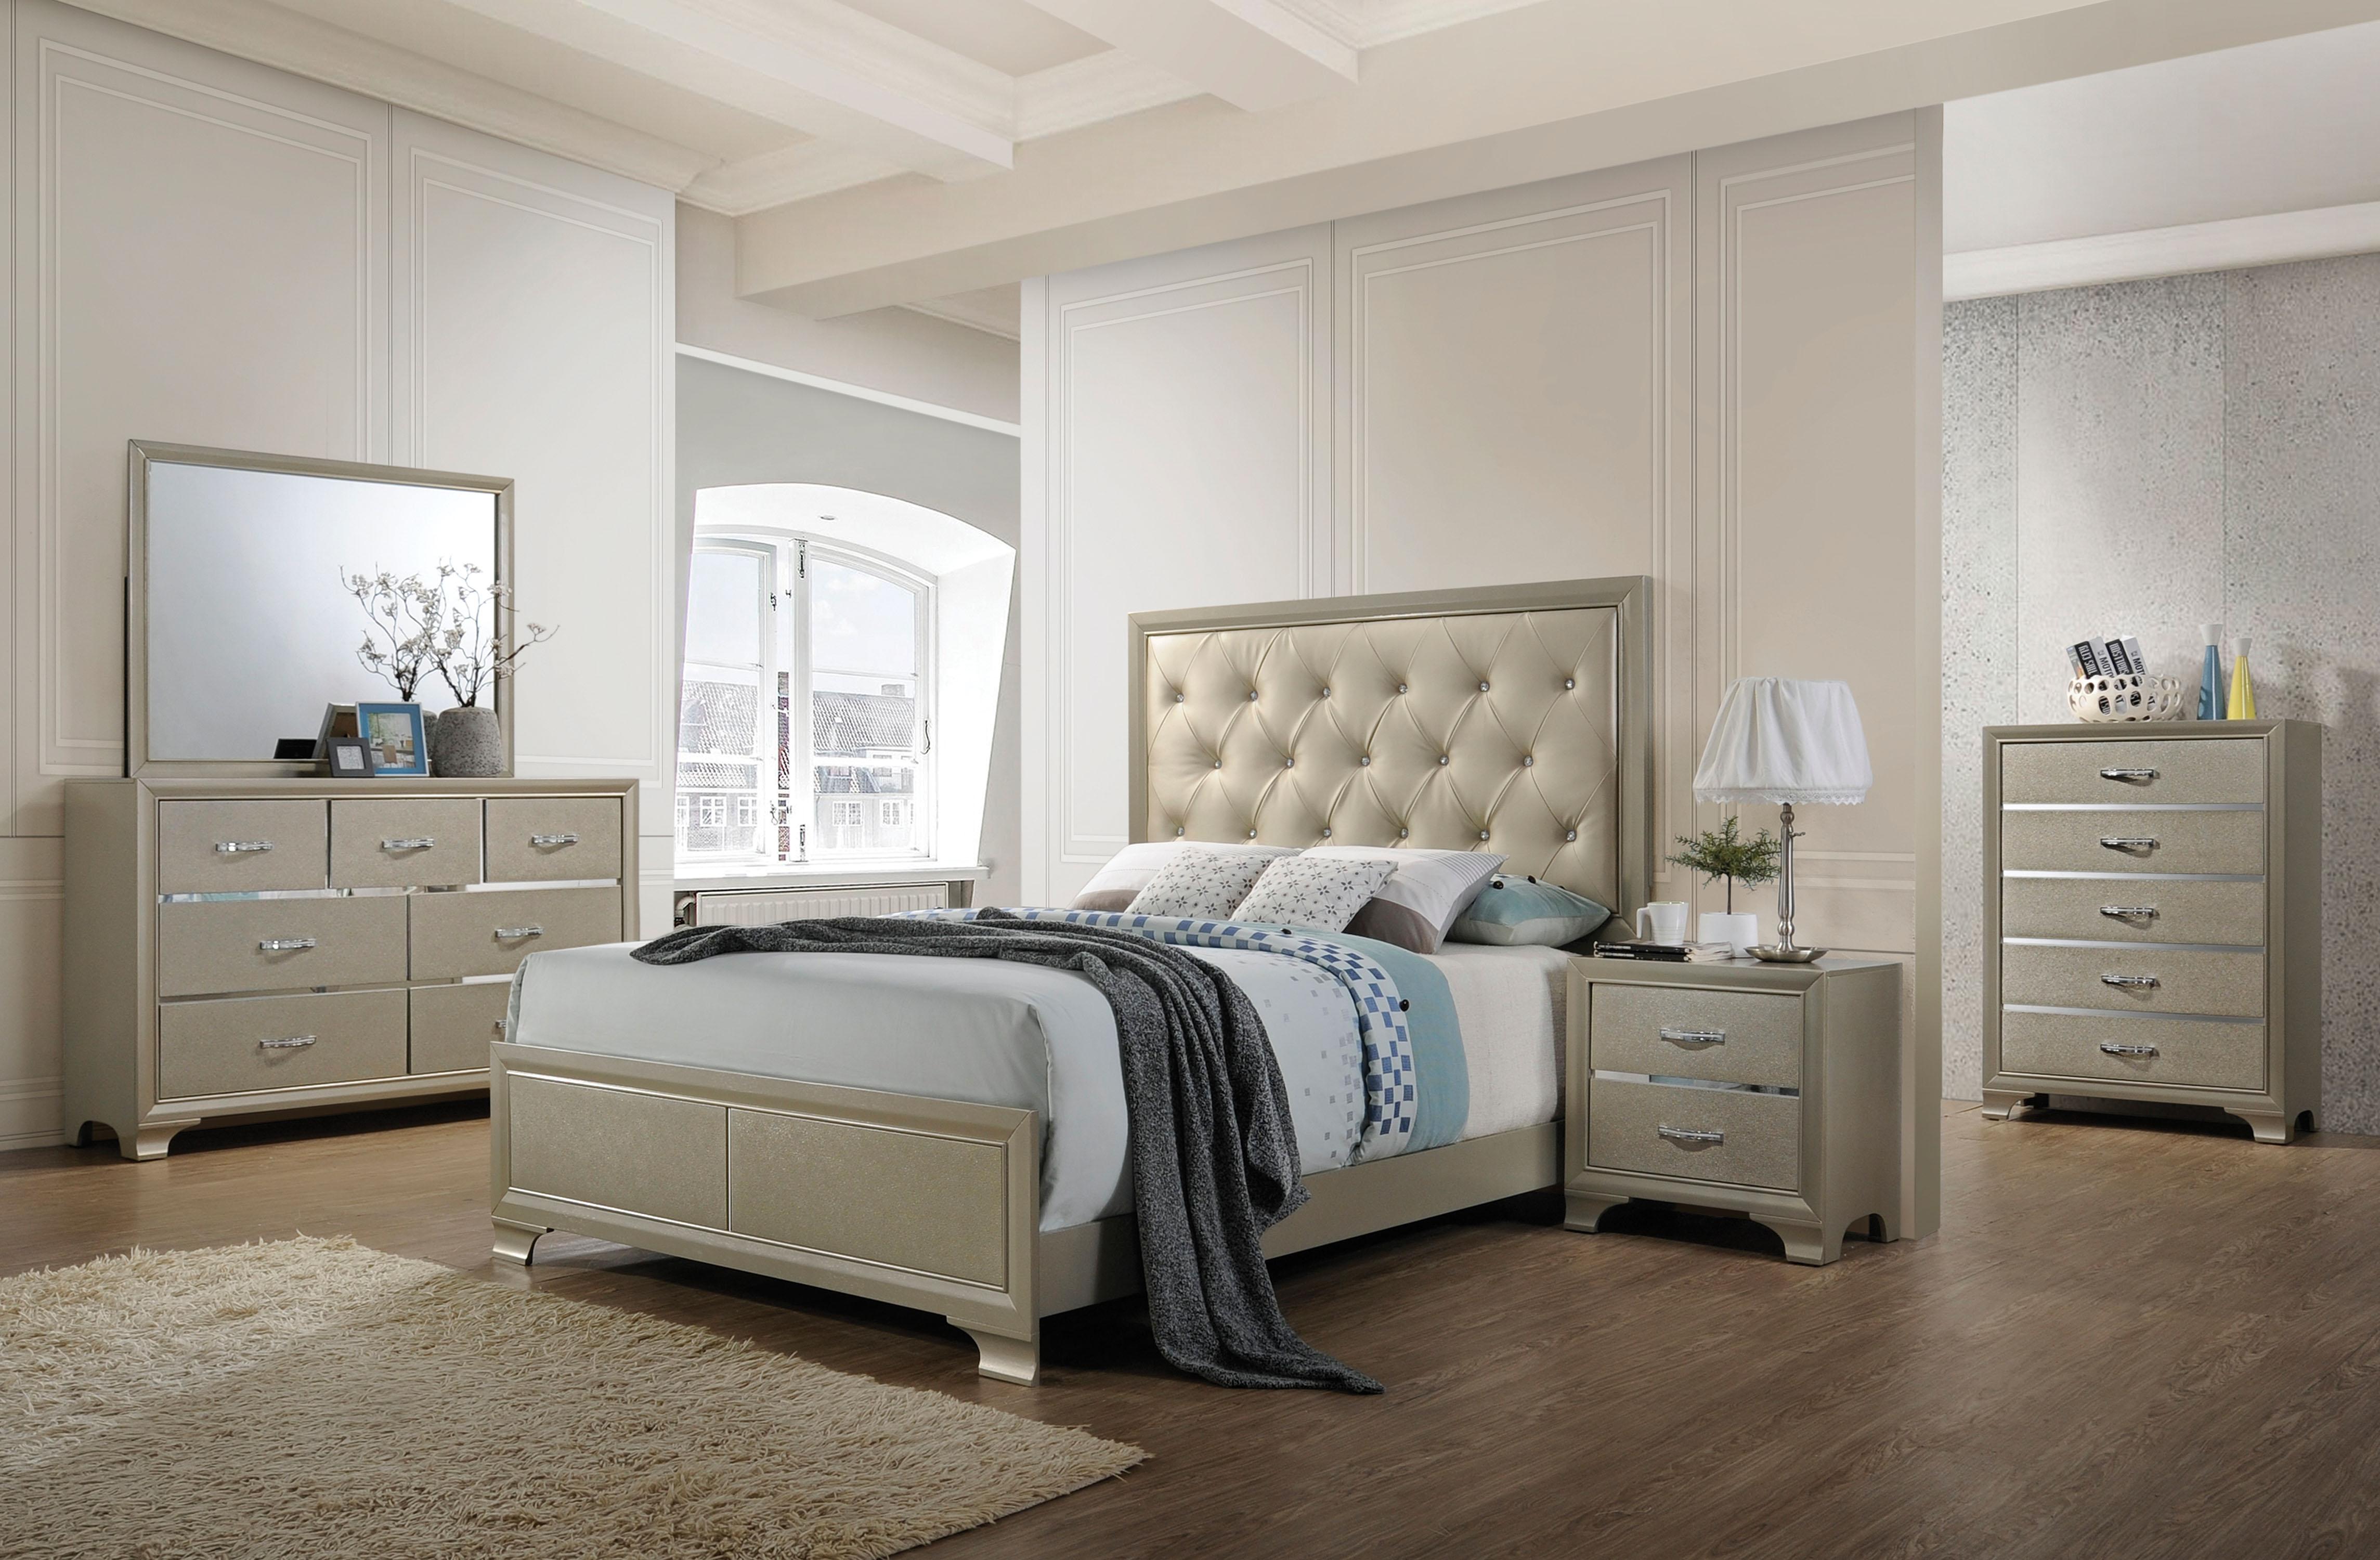 

    
26240Q-Set-3 Transitional Champagne Finish Button Tufted Headboard Queen Bedroom Set 3Pcs Carine-26240Q Acme
